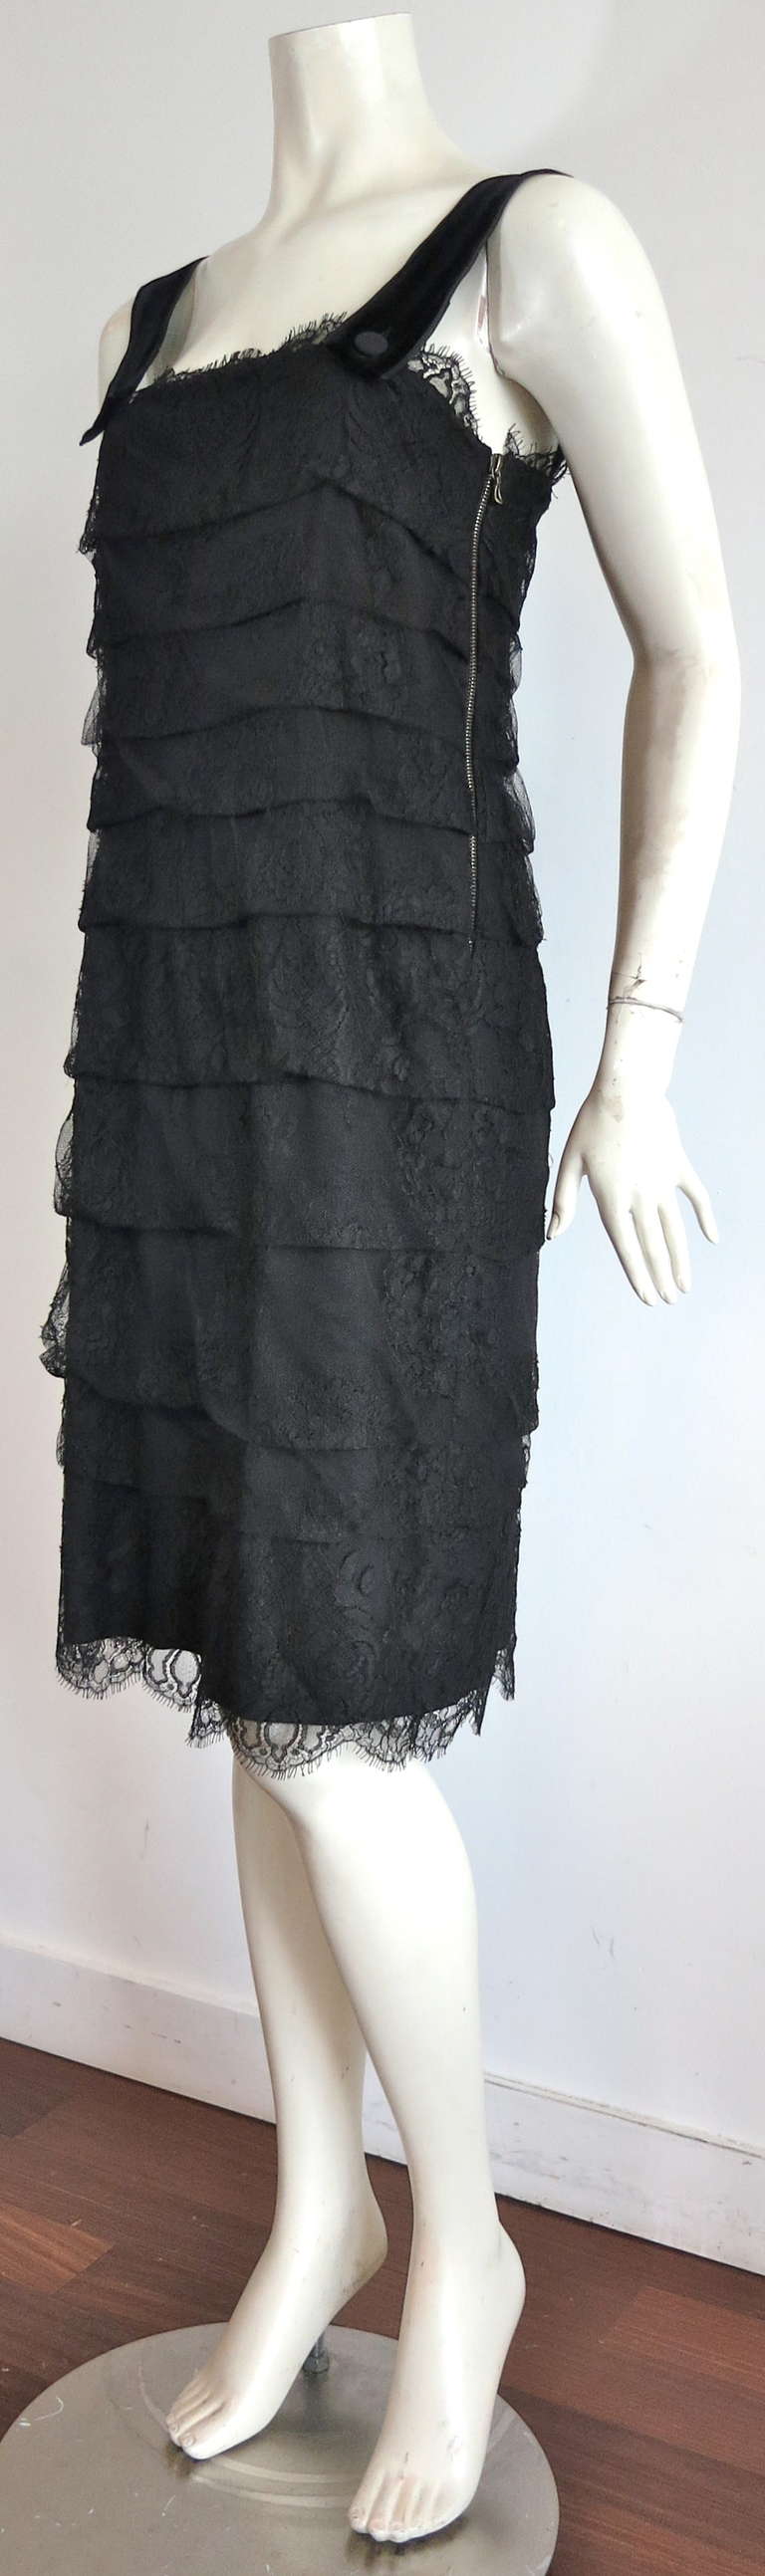 LANVIN PARIS  Tiered black lace dress In Excellent Condition For Sale In Newport Beach, CA